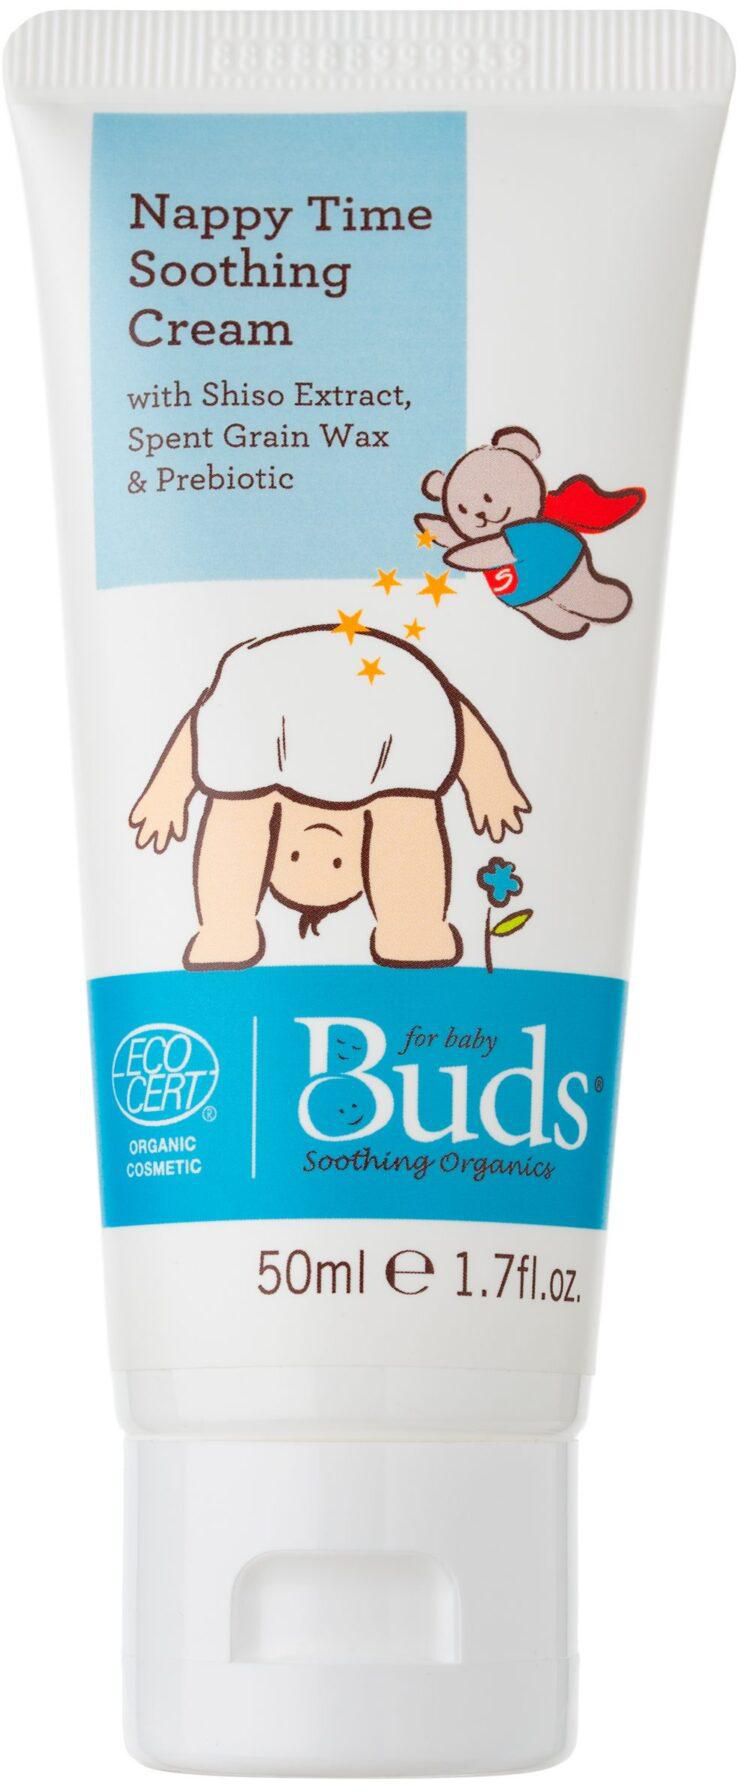 Buds Organics Nappy Time Soothing Cream BSO 50ml